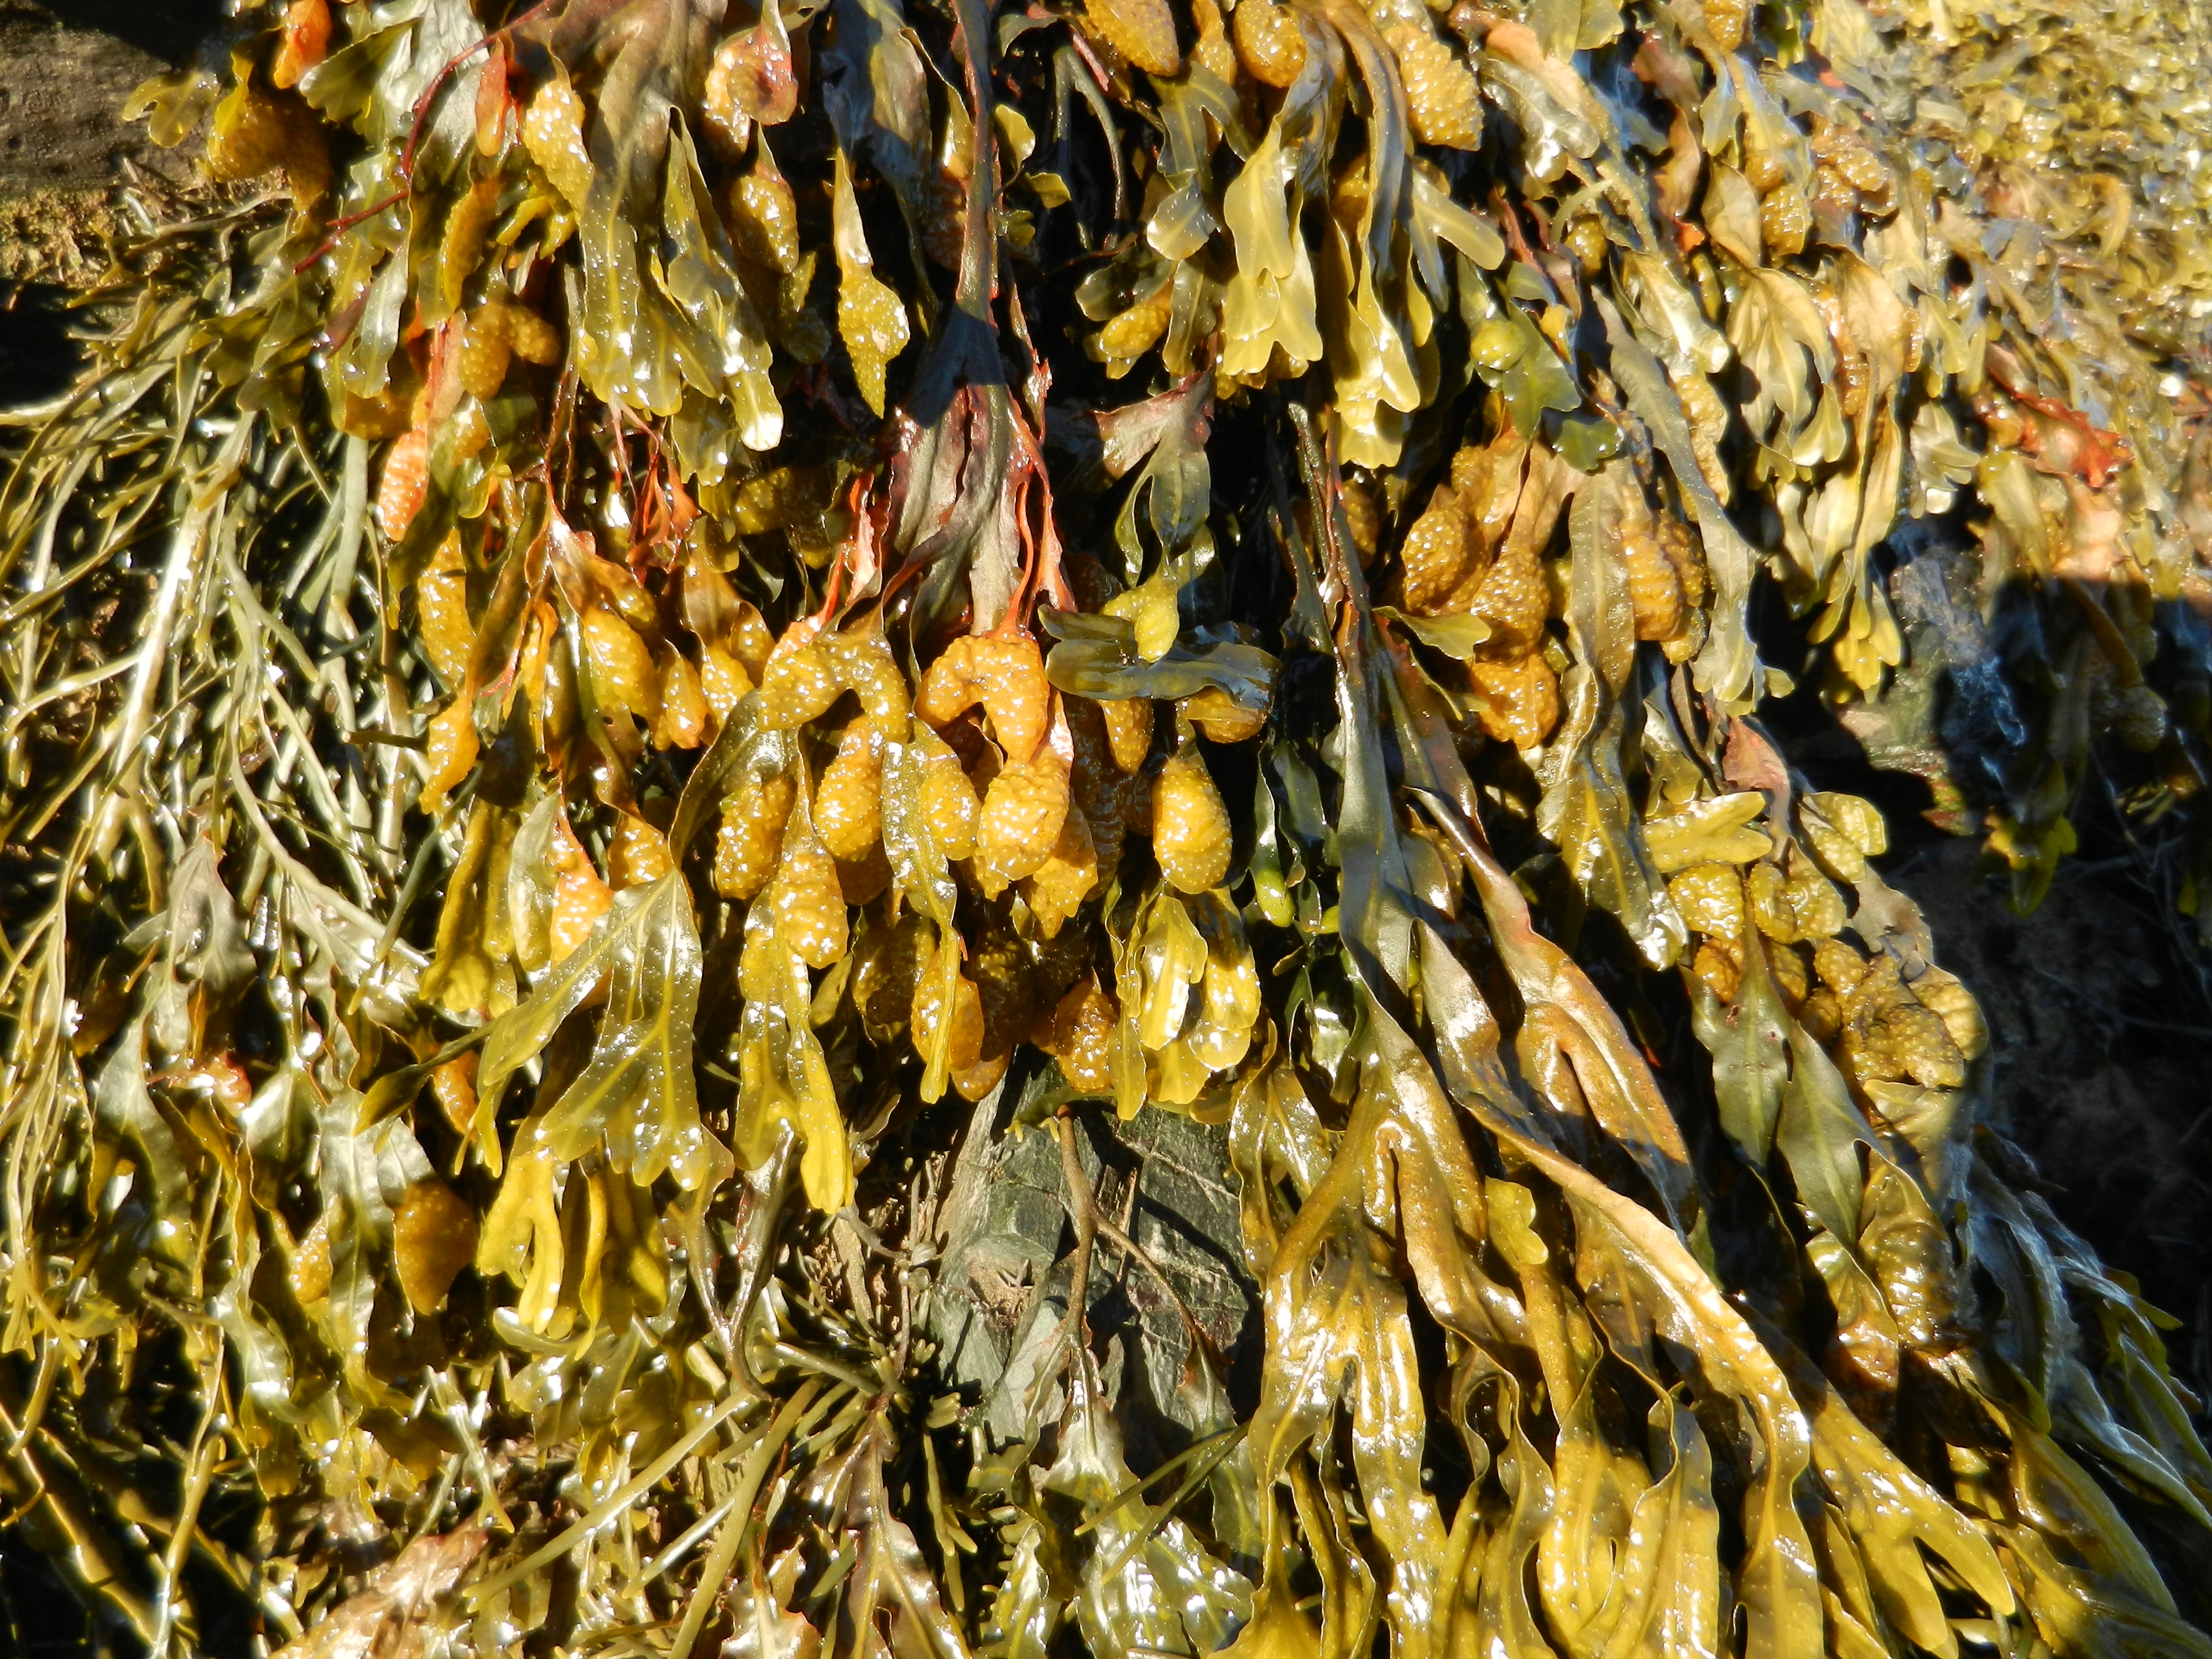 Fucus spiralis, growing in the upper intertidal zone of the Bay of Fundy, New Brunswick, Canada. The reproductive parts, the receptacles, are visible; they contain monoecious conceptacles with both male and female reproductive organs (photo credit: Thierry Chopin).